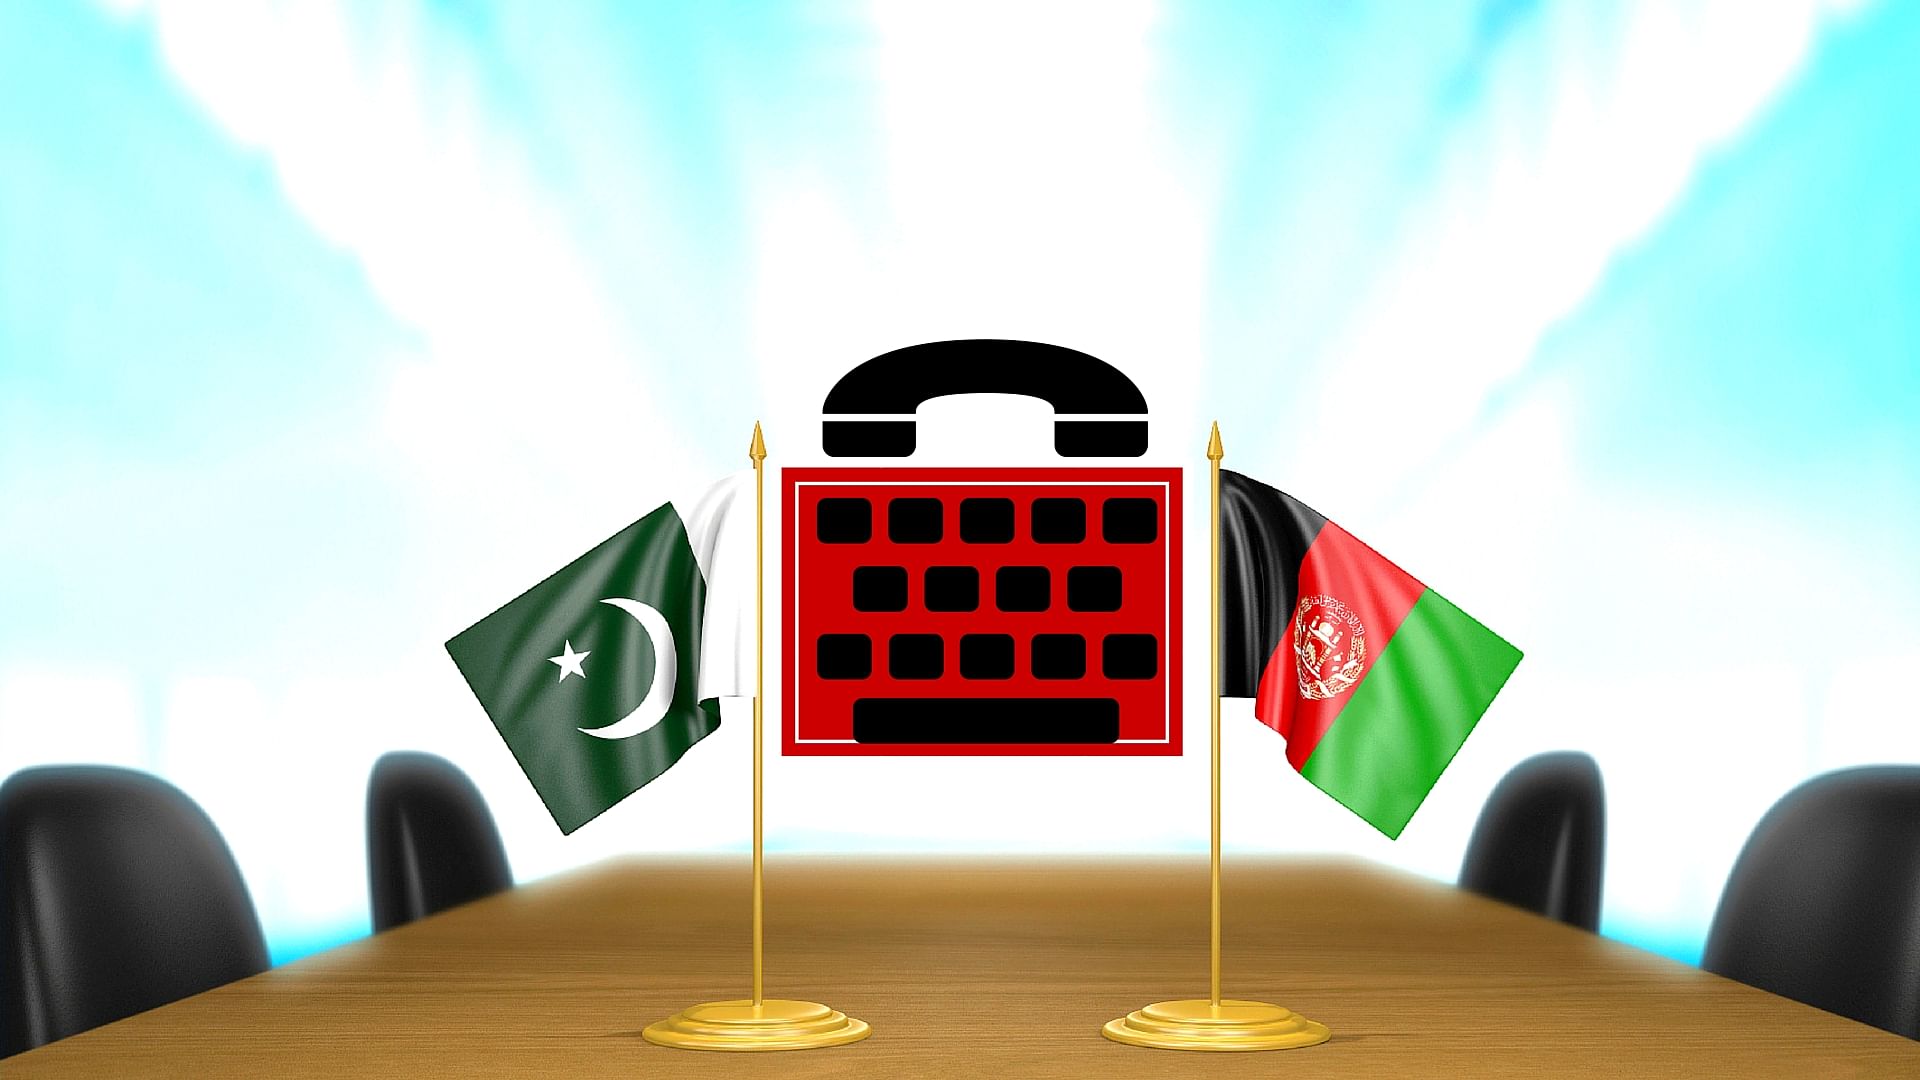 ‘Hello from the other side’. Pakistan and Afghanistan set up a hotline connection between the two countries. (Photo: <b>The Quint</b>)